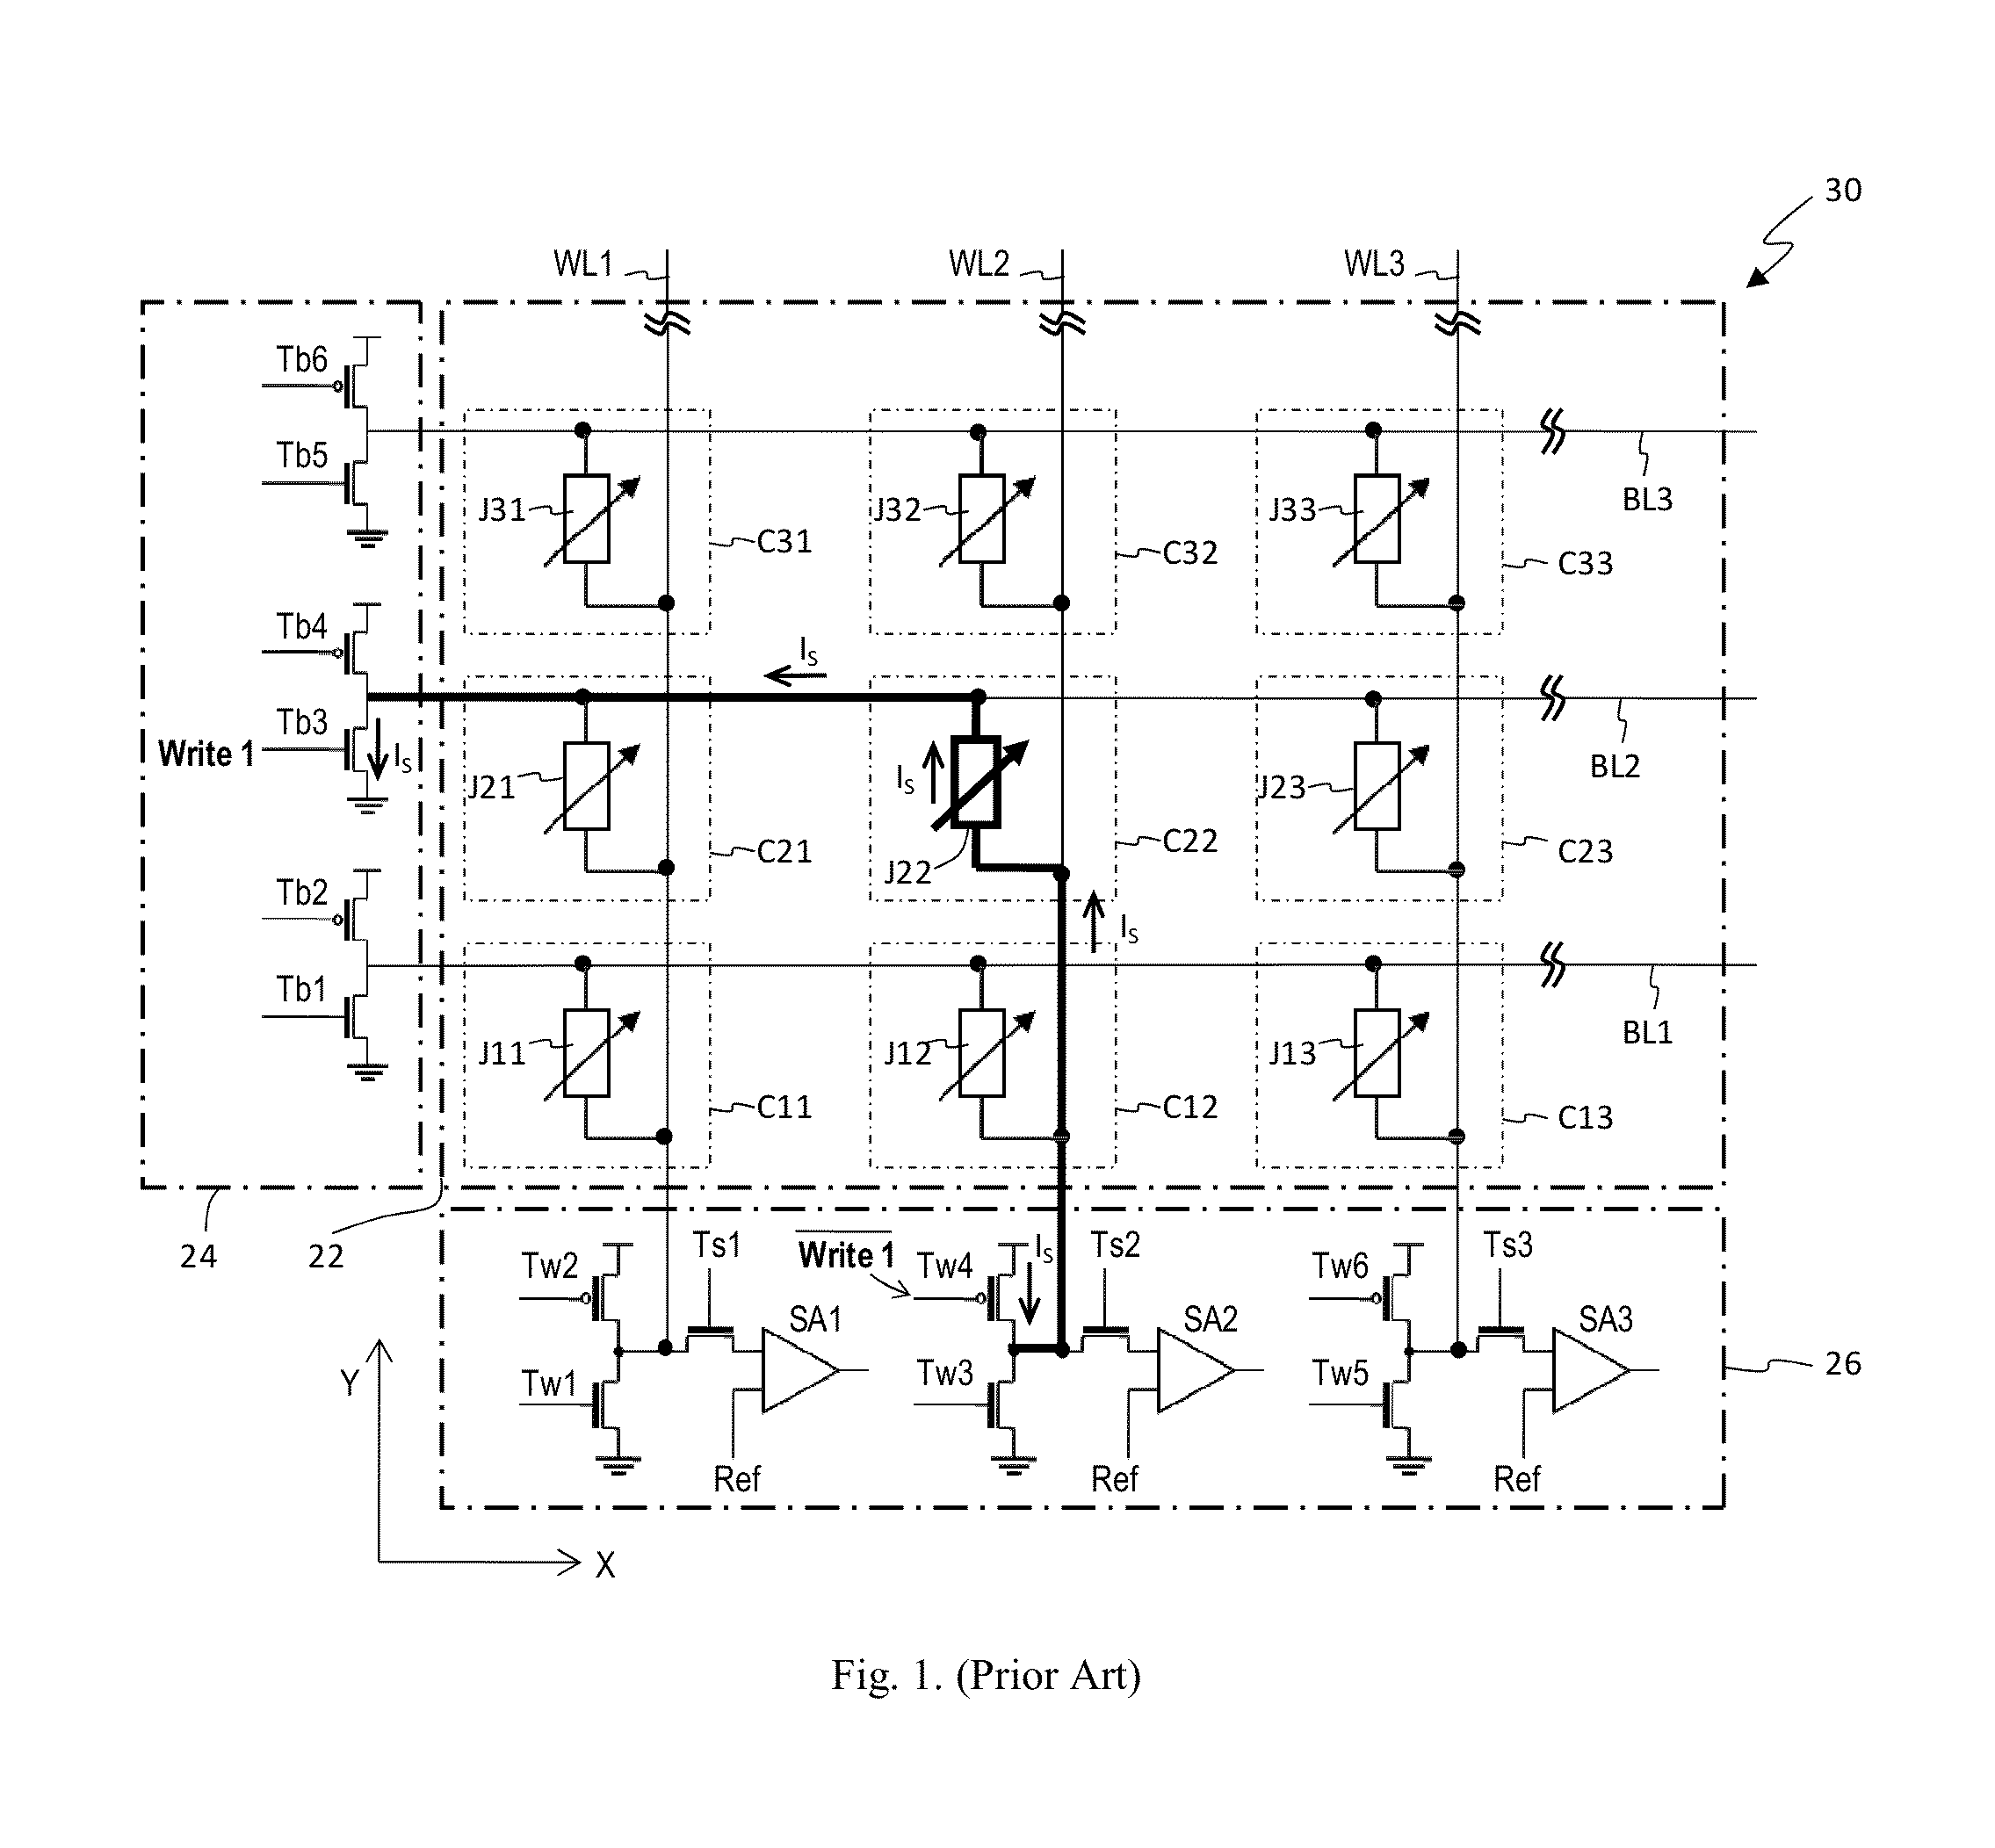 Low Cost High Density Nonvolatile Memory Array Device Employing Thin Film Transistors and Back to Back Schottky Diodes